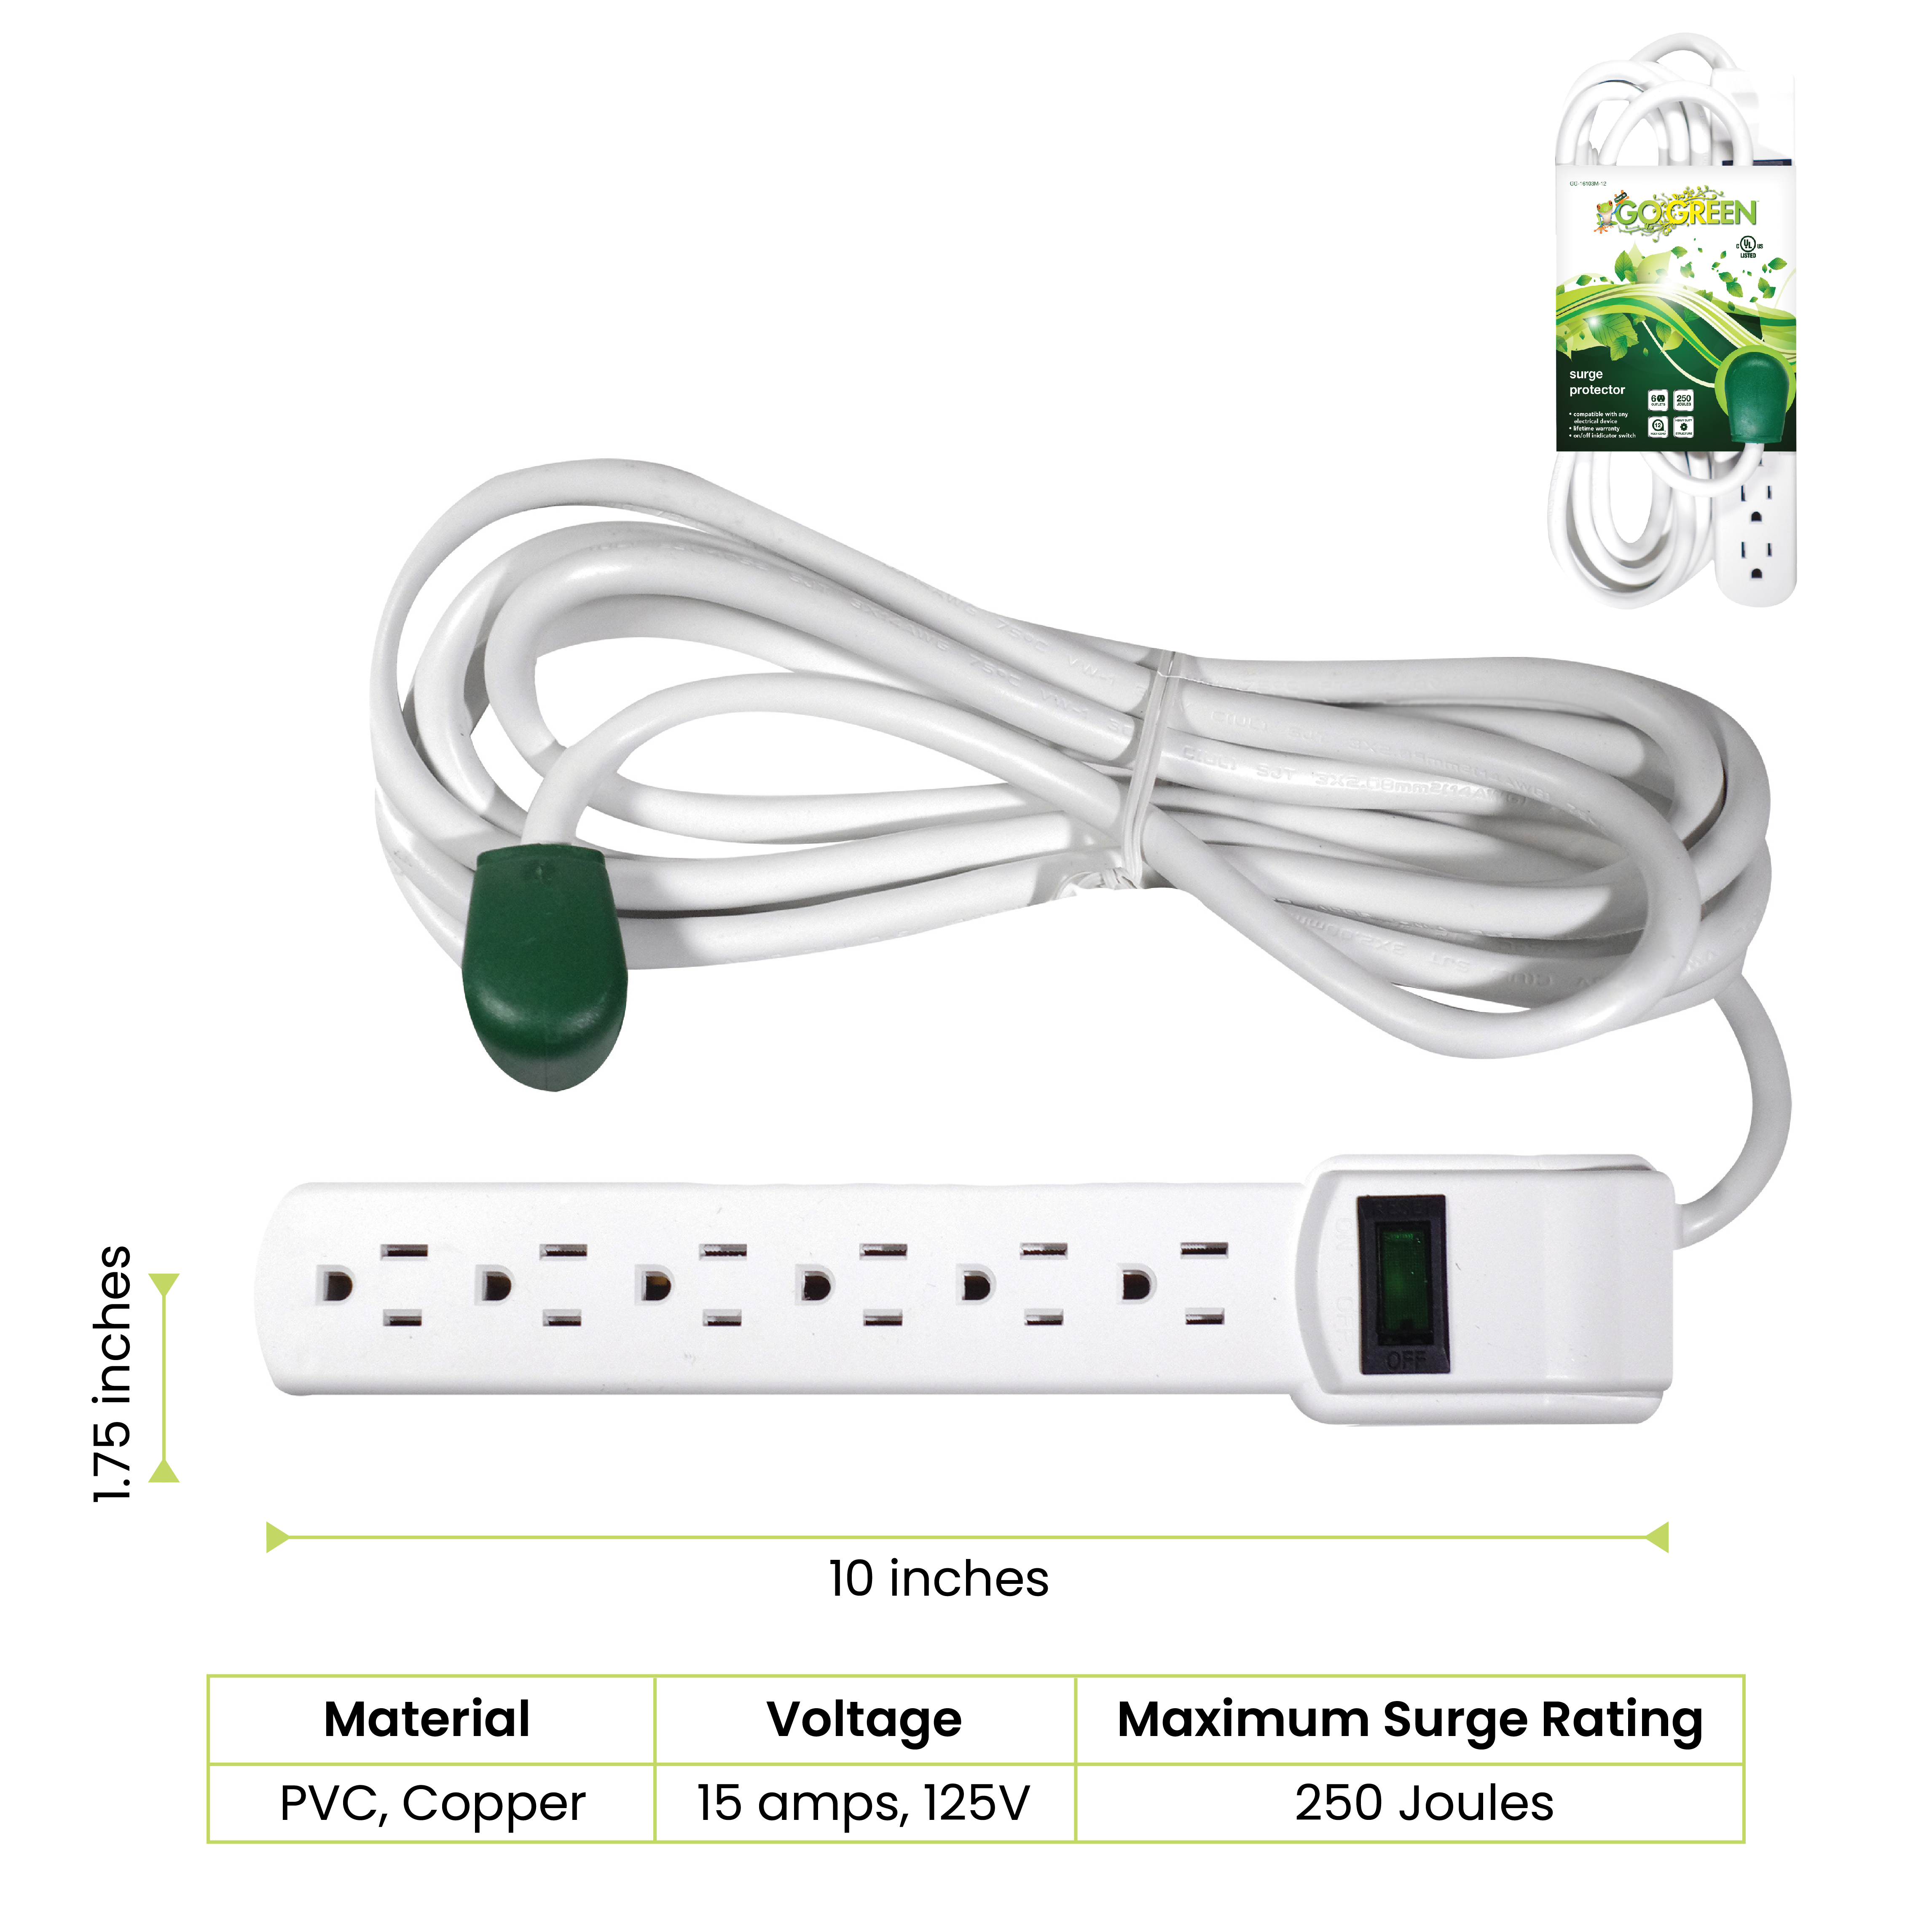 GoGreen Power GG-16103M-12 - 6 Outlet Surge Protector With 12ft Cord, White - image 3 of 8